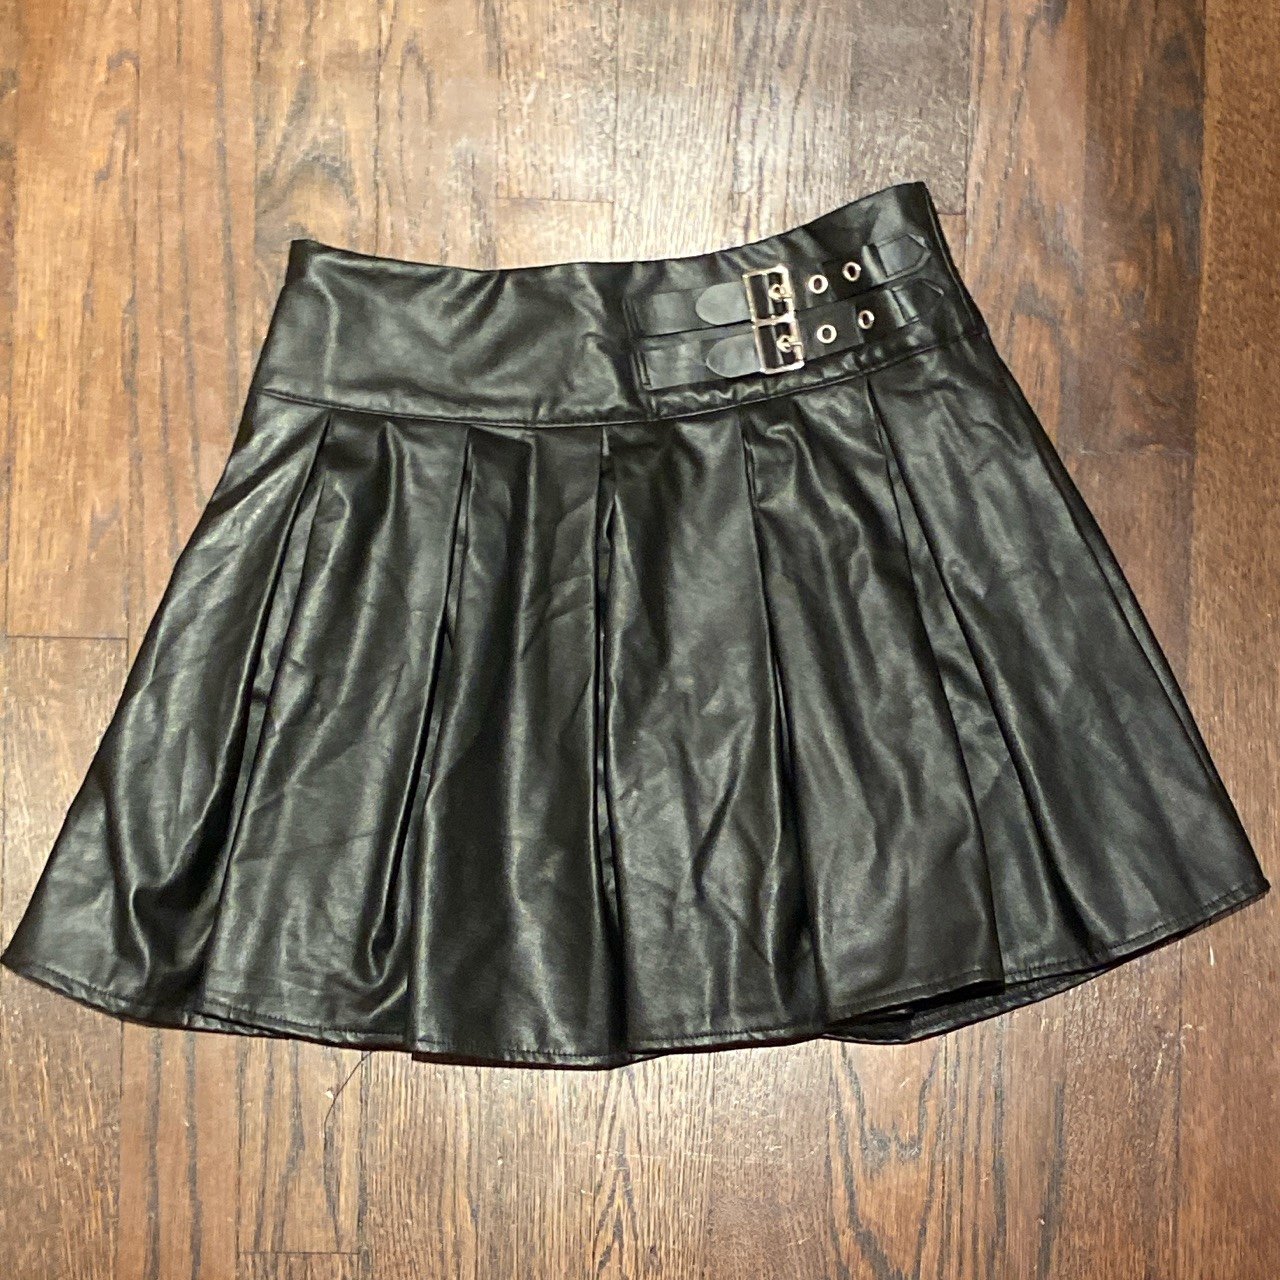 Promotions  NEW Hot Topic Skirt pEY4tfTdt well sale